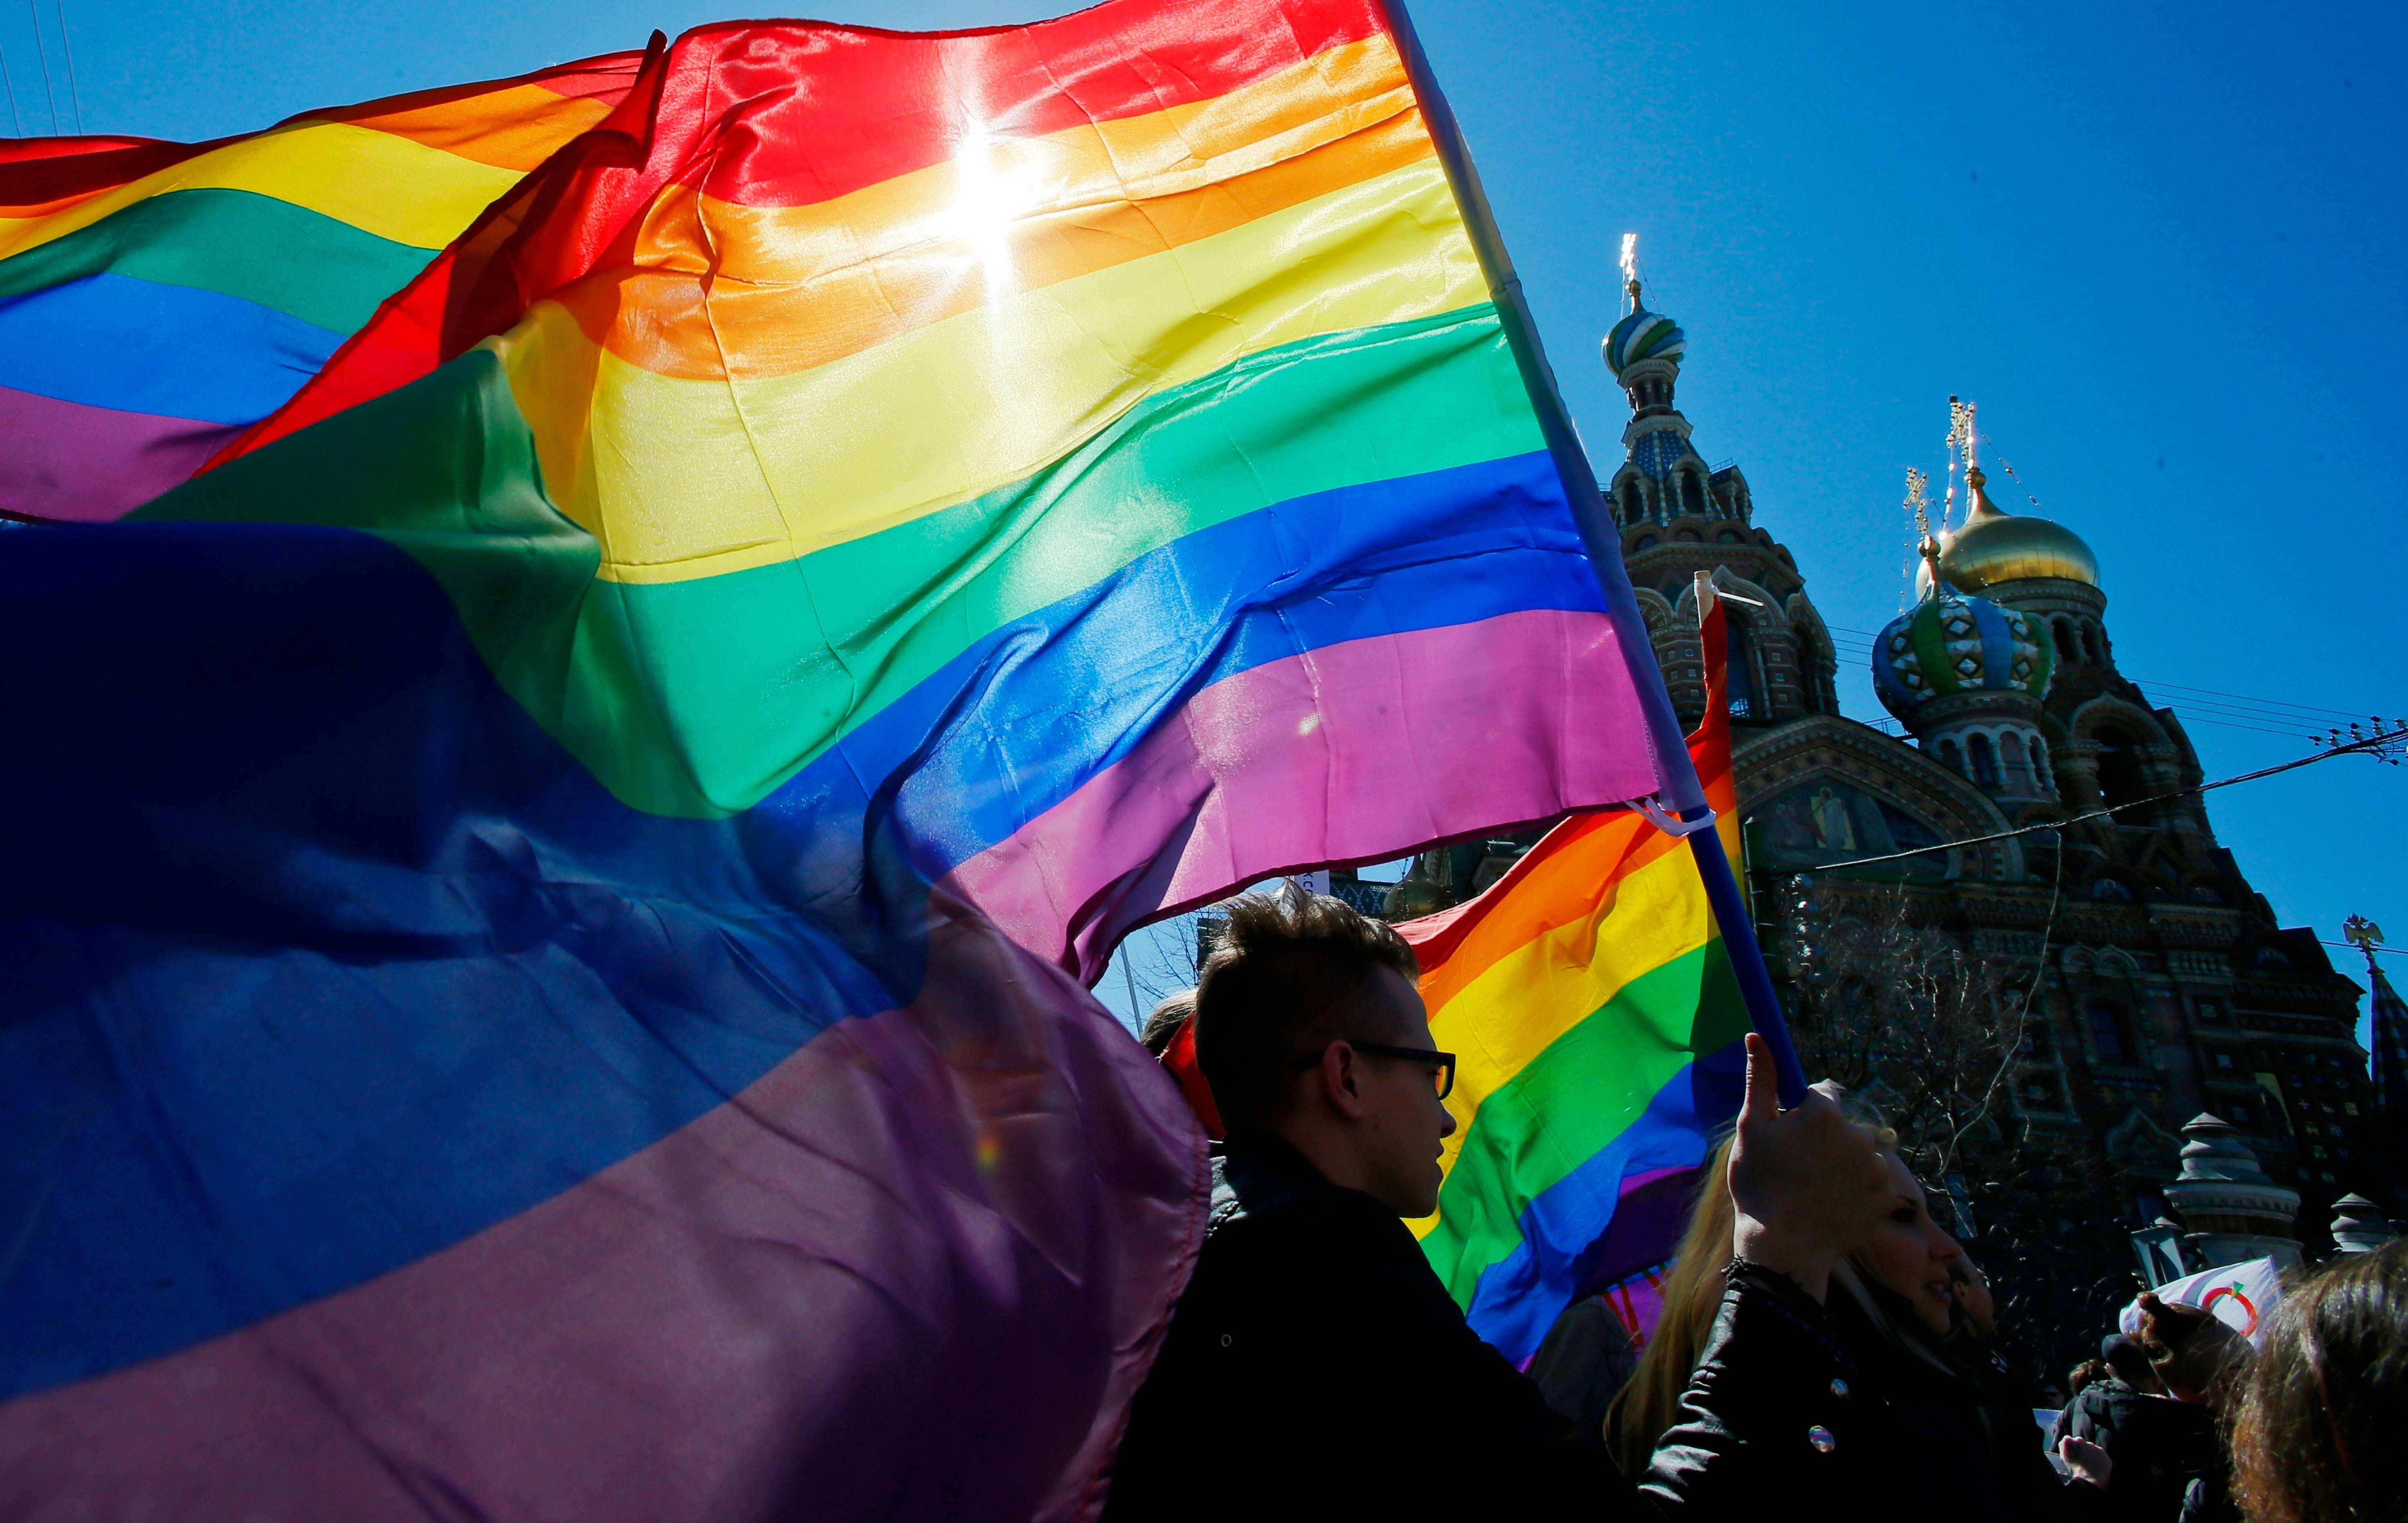 Gay rights activists carry rainbow flags as they march during a May Day rally in St. Petersburg, Russia (File photo).